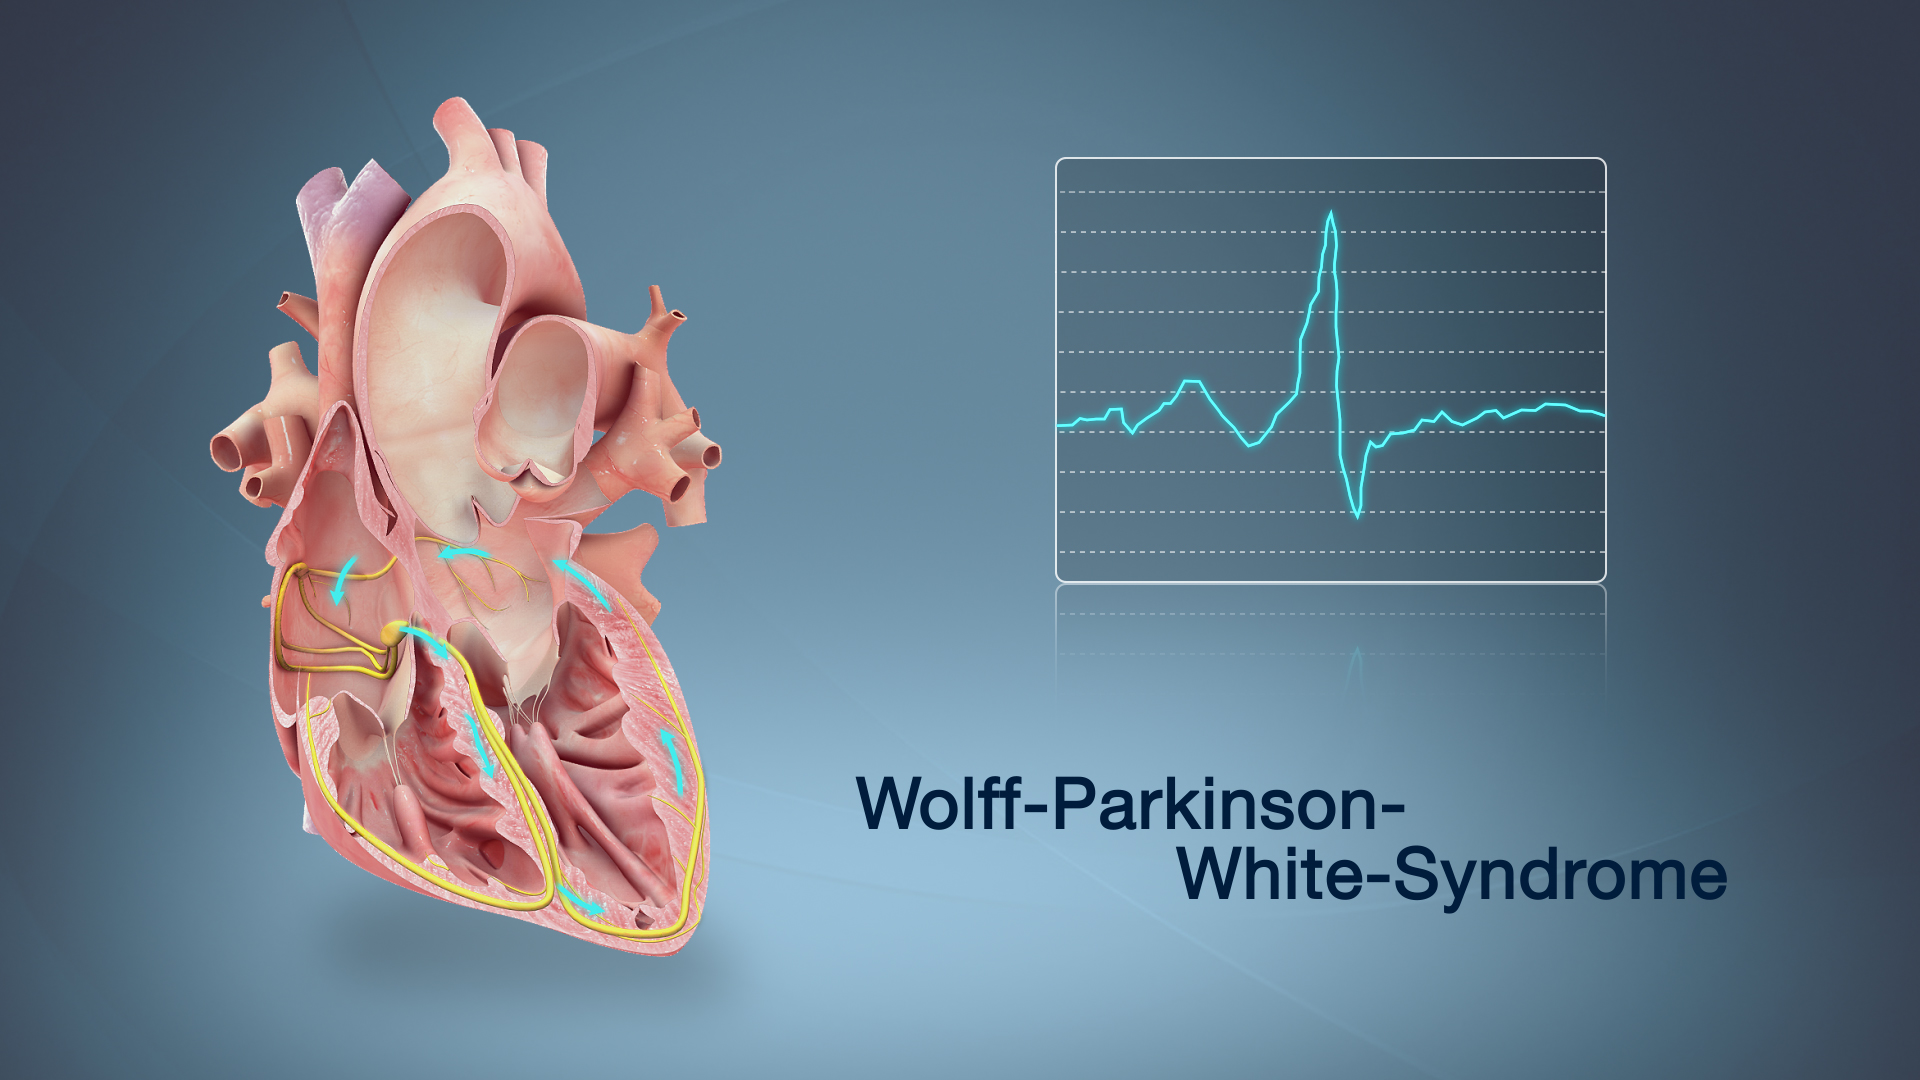 Medical Animation Showing Wolff-Parkinson-White Syndrome